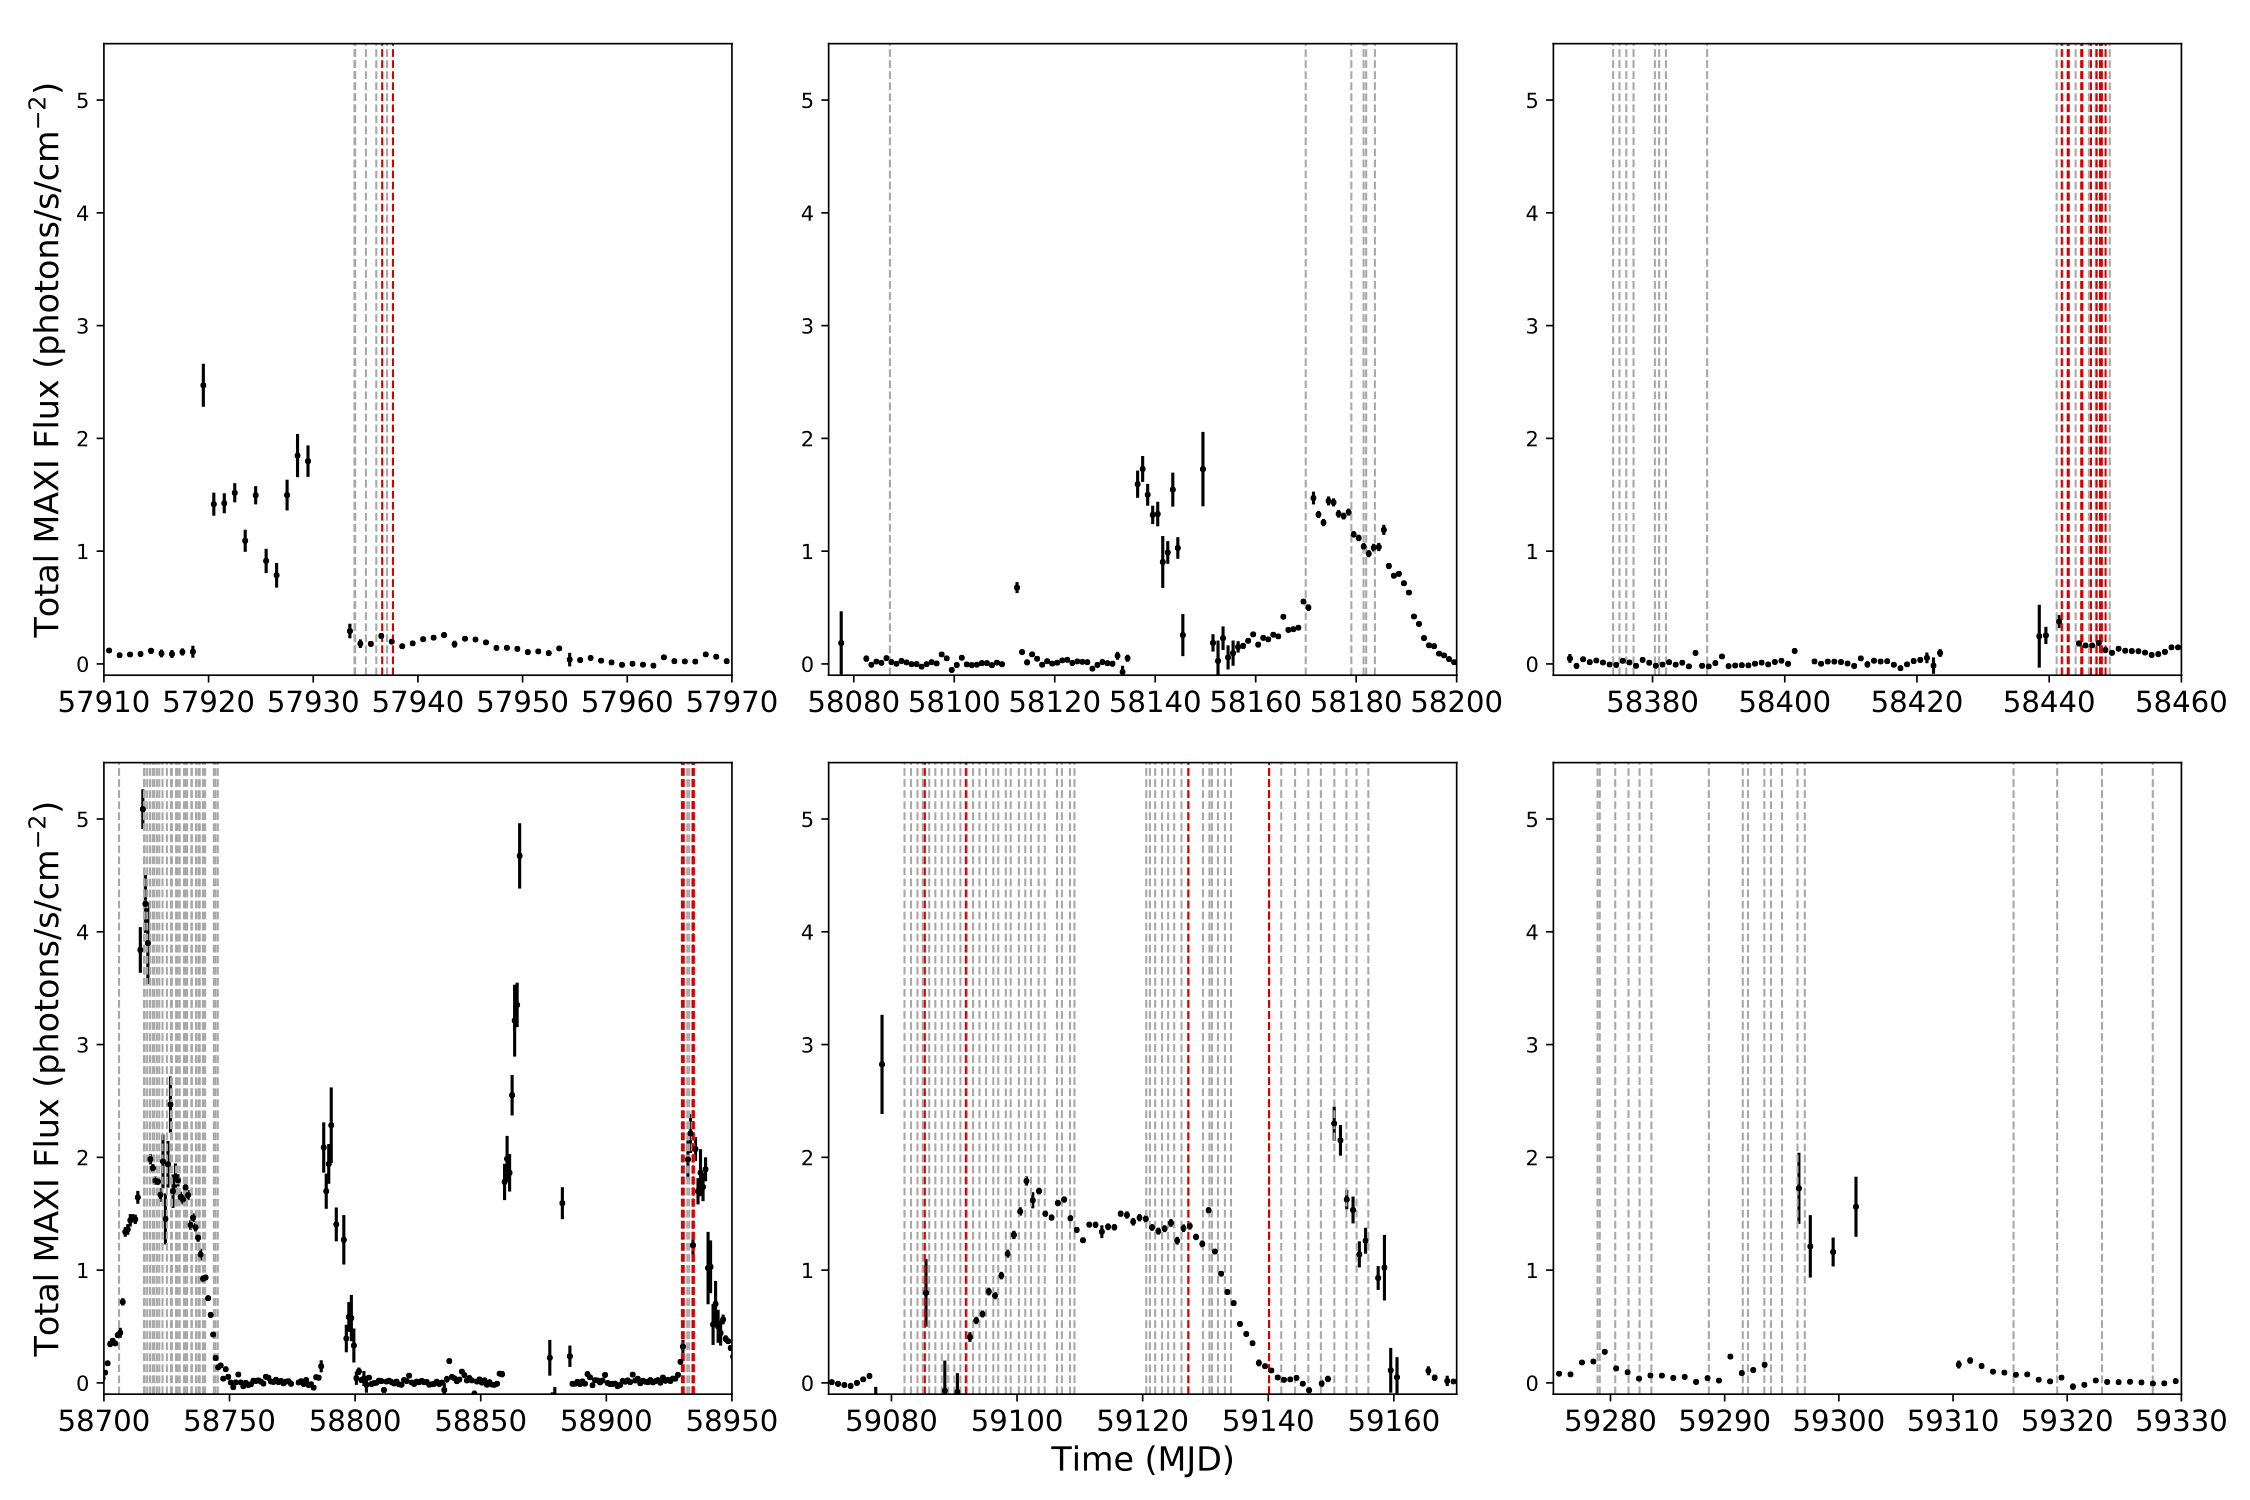 Long-term lightcurves of Aql X-1 as observed by MAXI in the 2-20 keV photon energy band. The MAXI data are shown with black dots, and each panel captures one or more outbursts. The grey vertical dashed lines indicate NICER observation times; the red dashed lines show the times when a thermonuclear X-ray burst was detected by NICER.